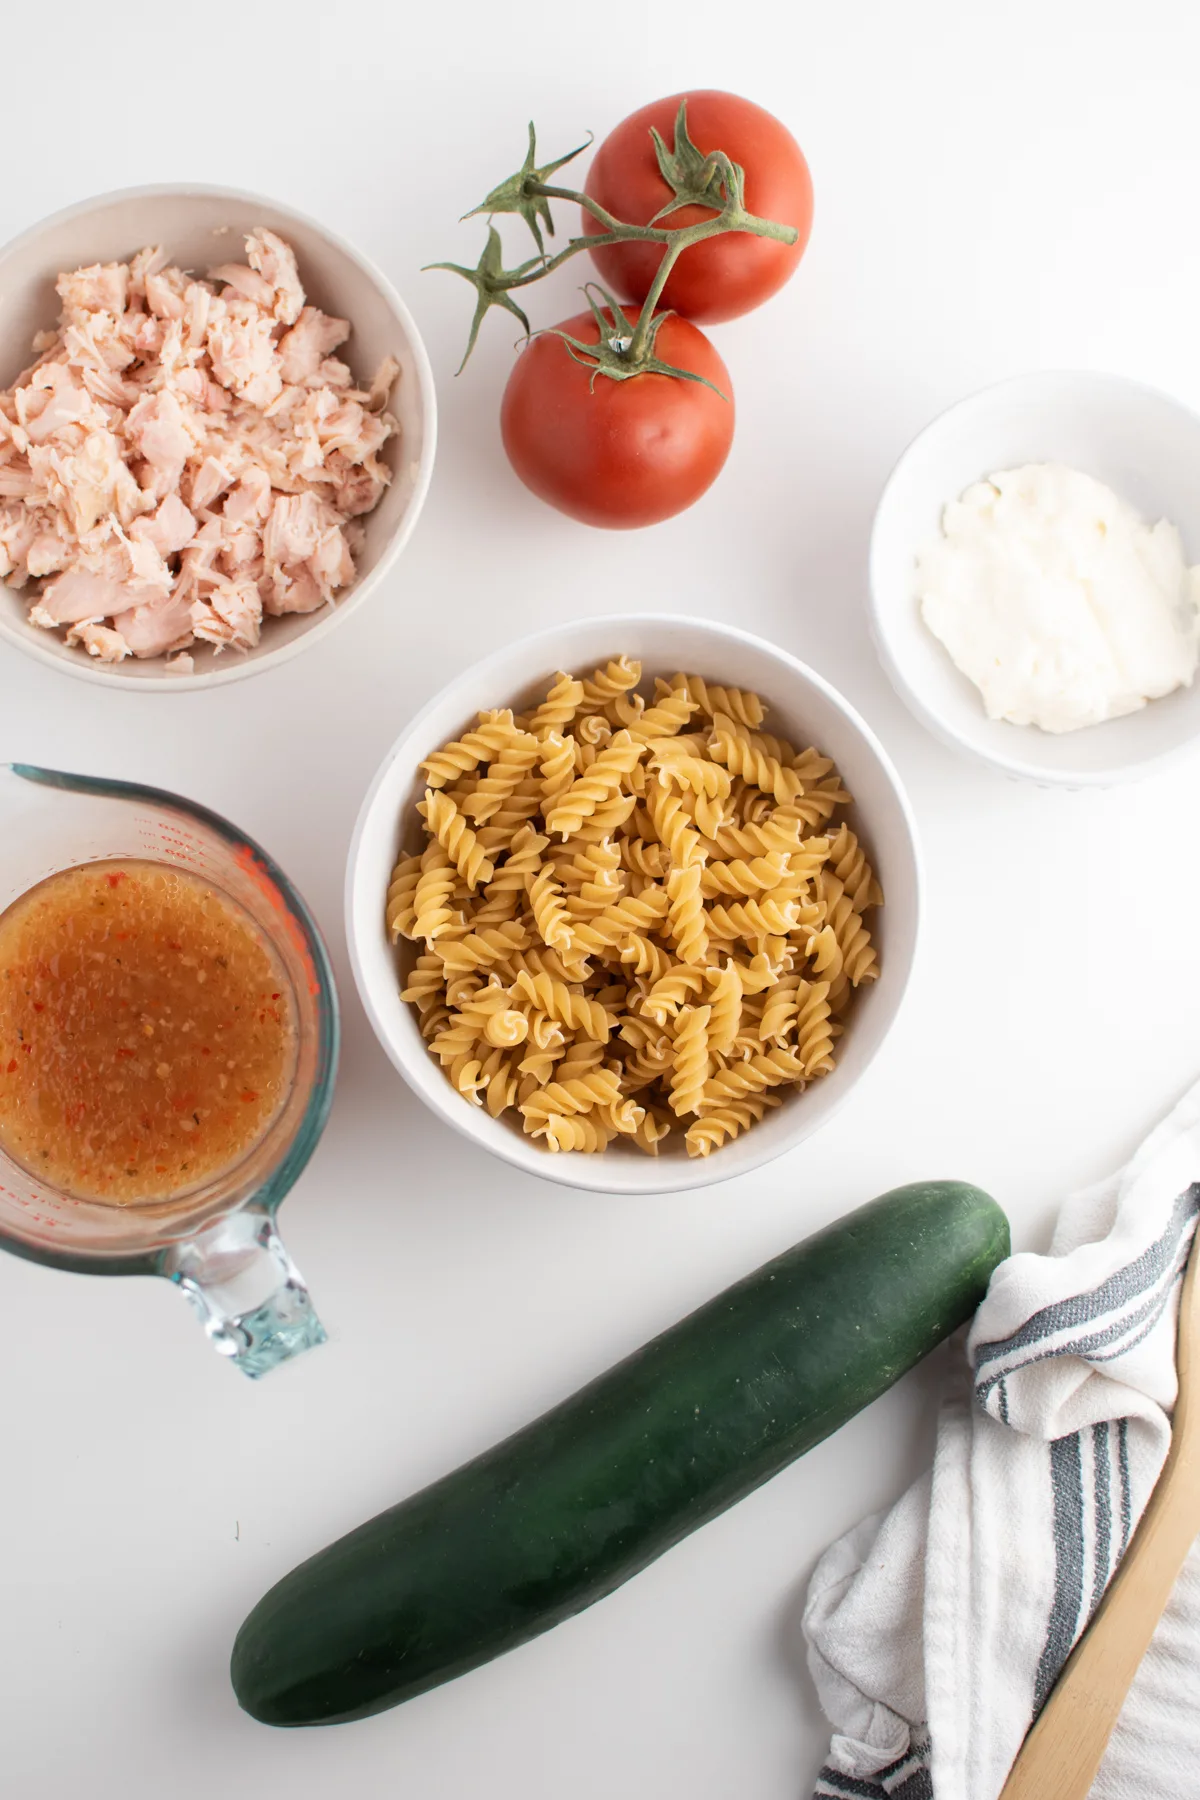 Rotini pasta salad ingredients including rotini, mayo, dressing, chunk chicken and tomatoes.